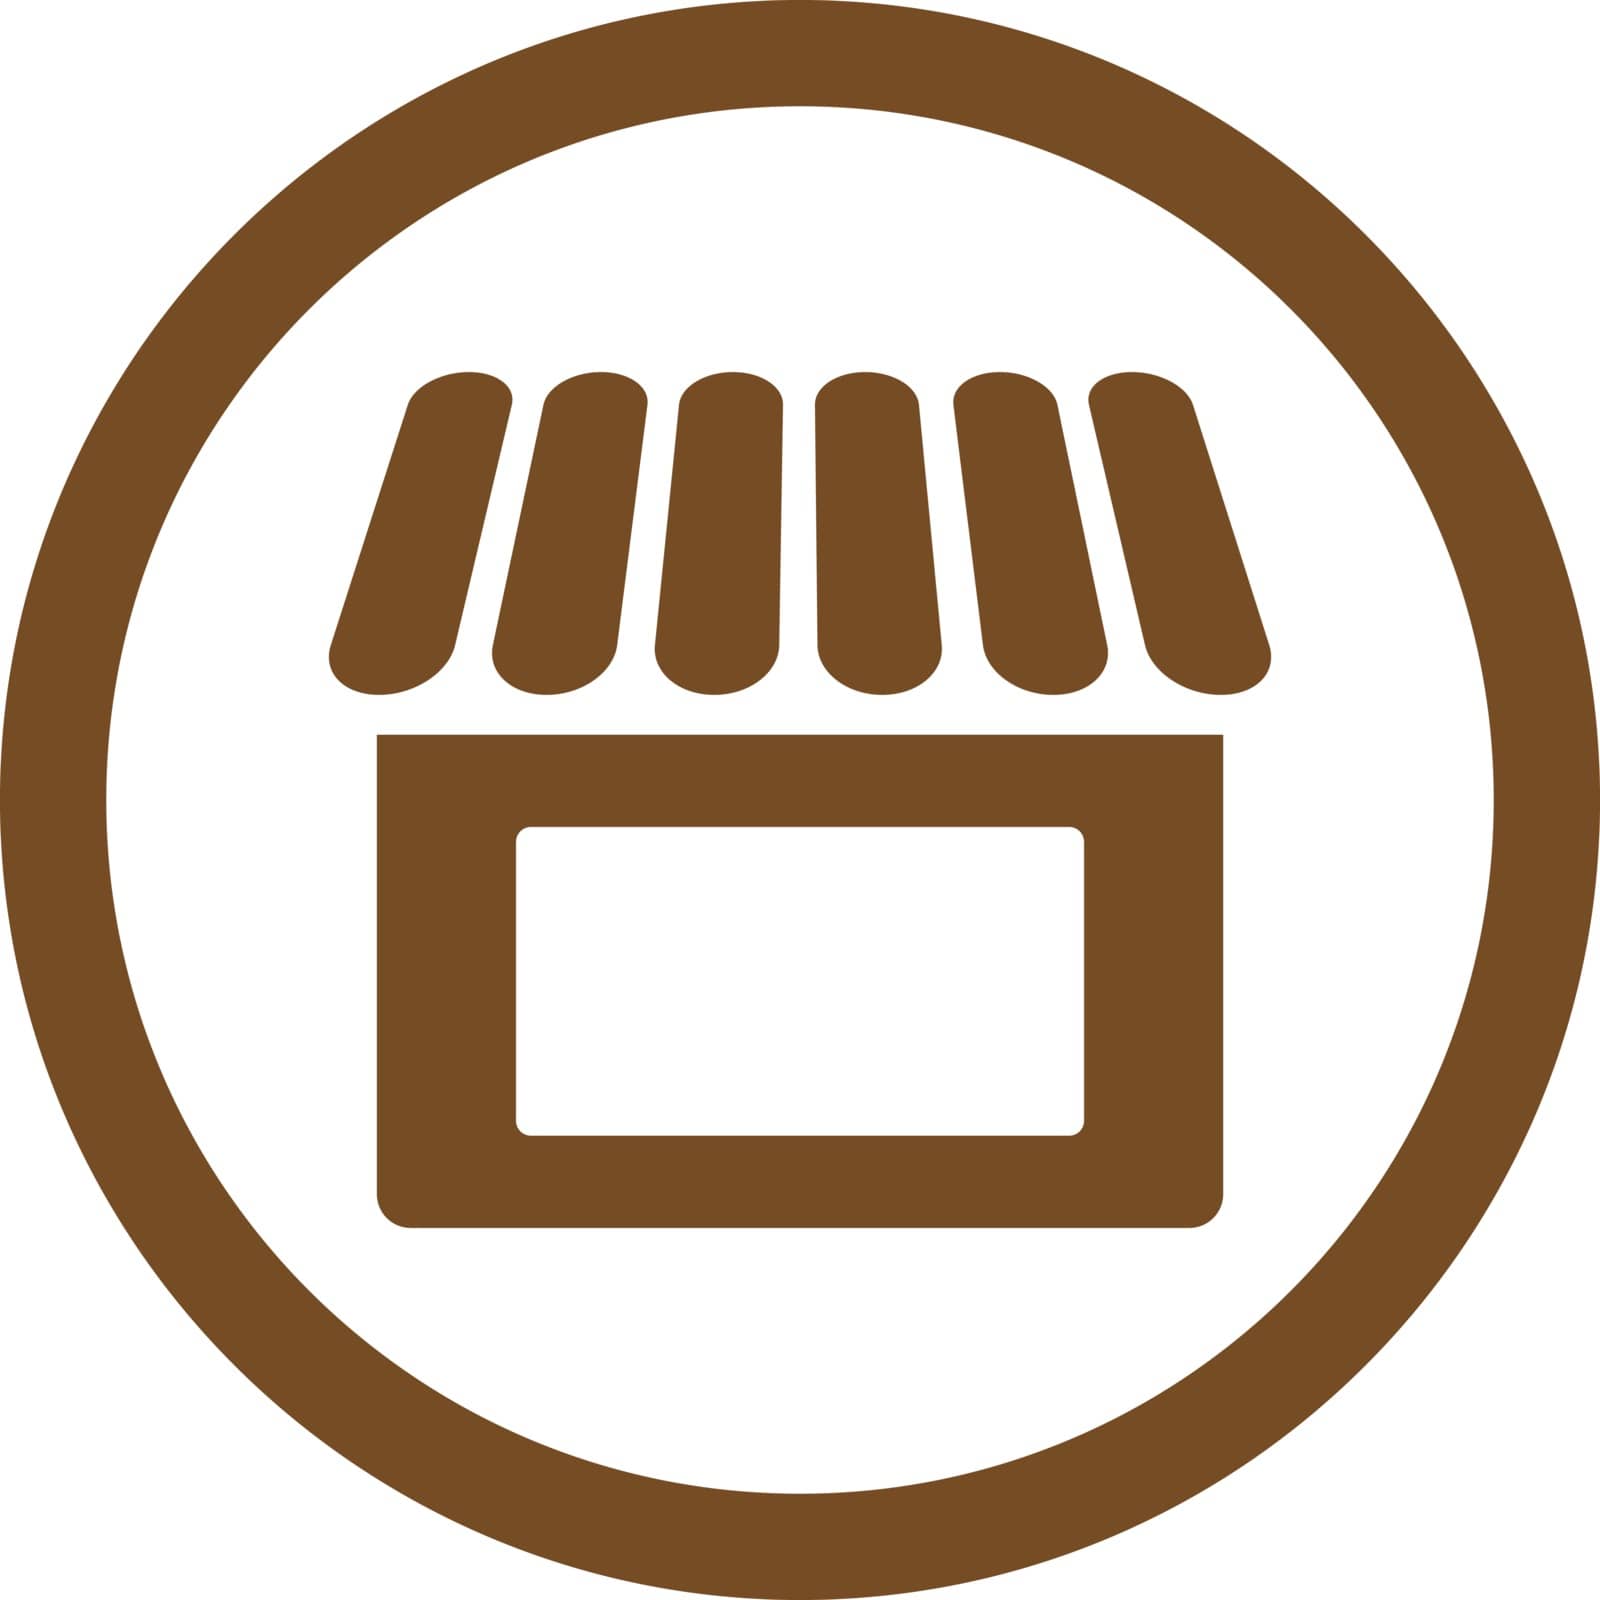 Shop vector icon. This flat rounded symbol uses brown color and isolated on a white background.